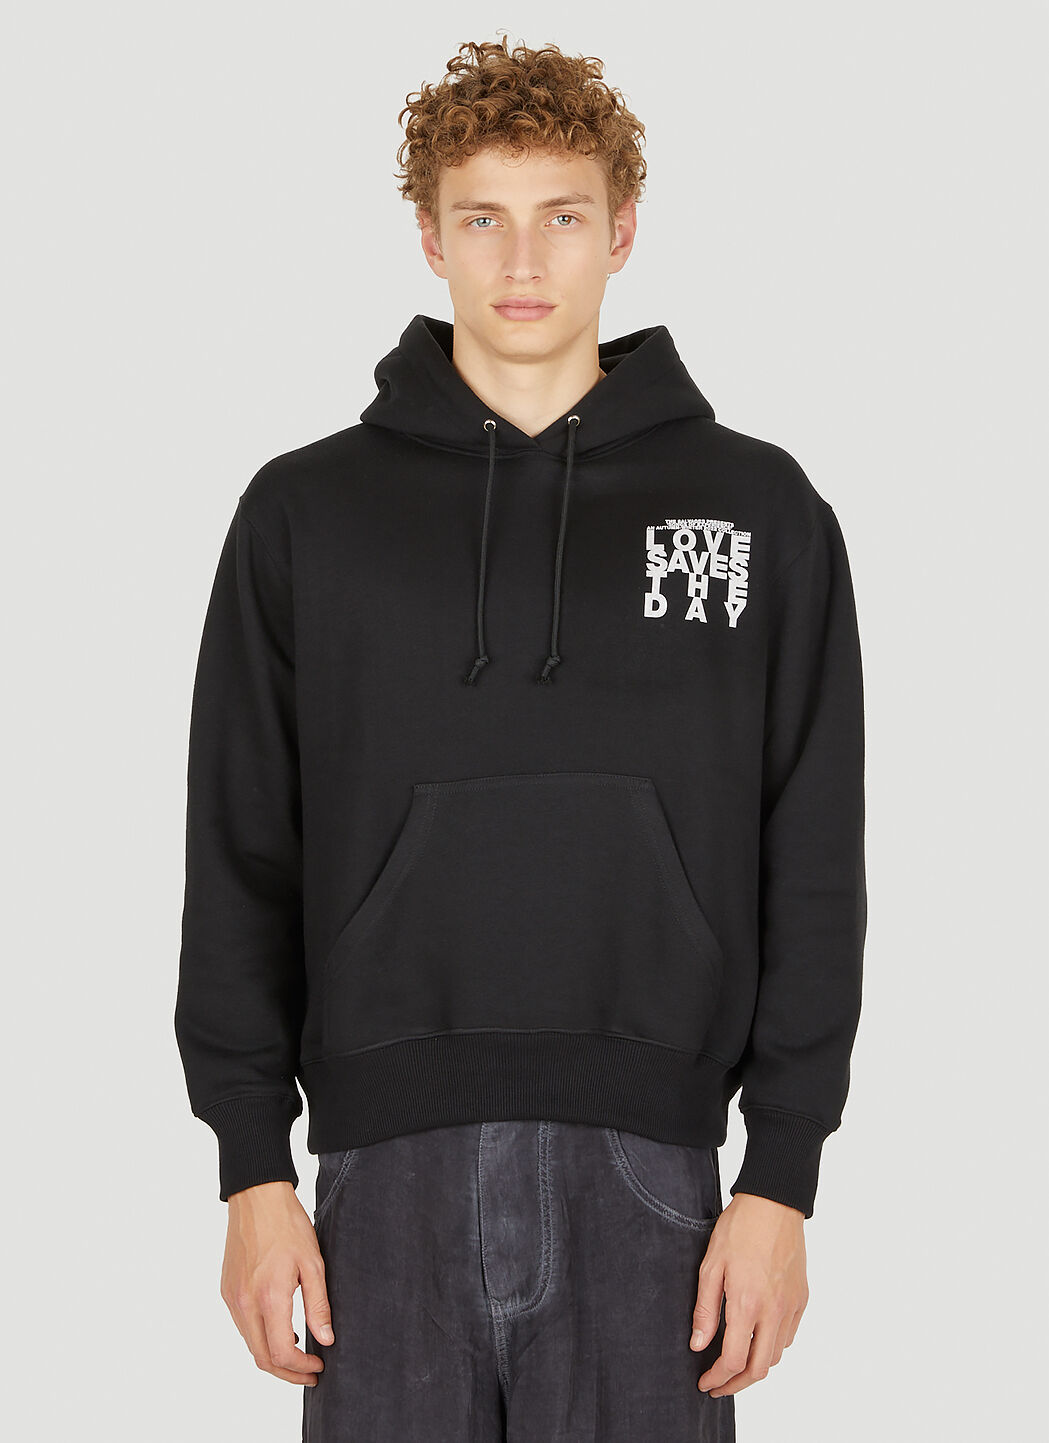 The Salvages Love Saves The Day Hooded Sweatshirt Black slv0148007